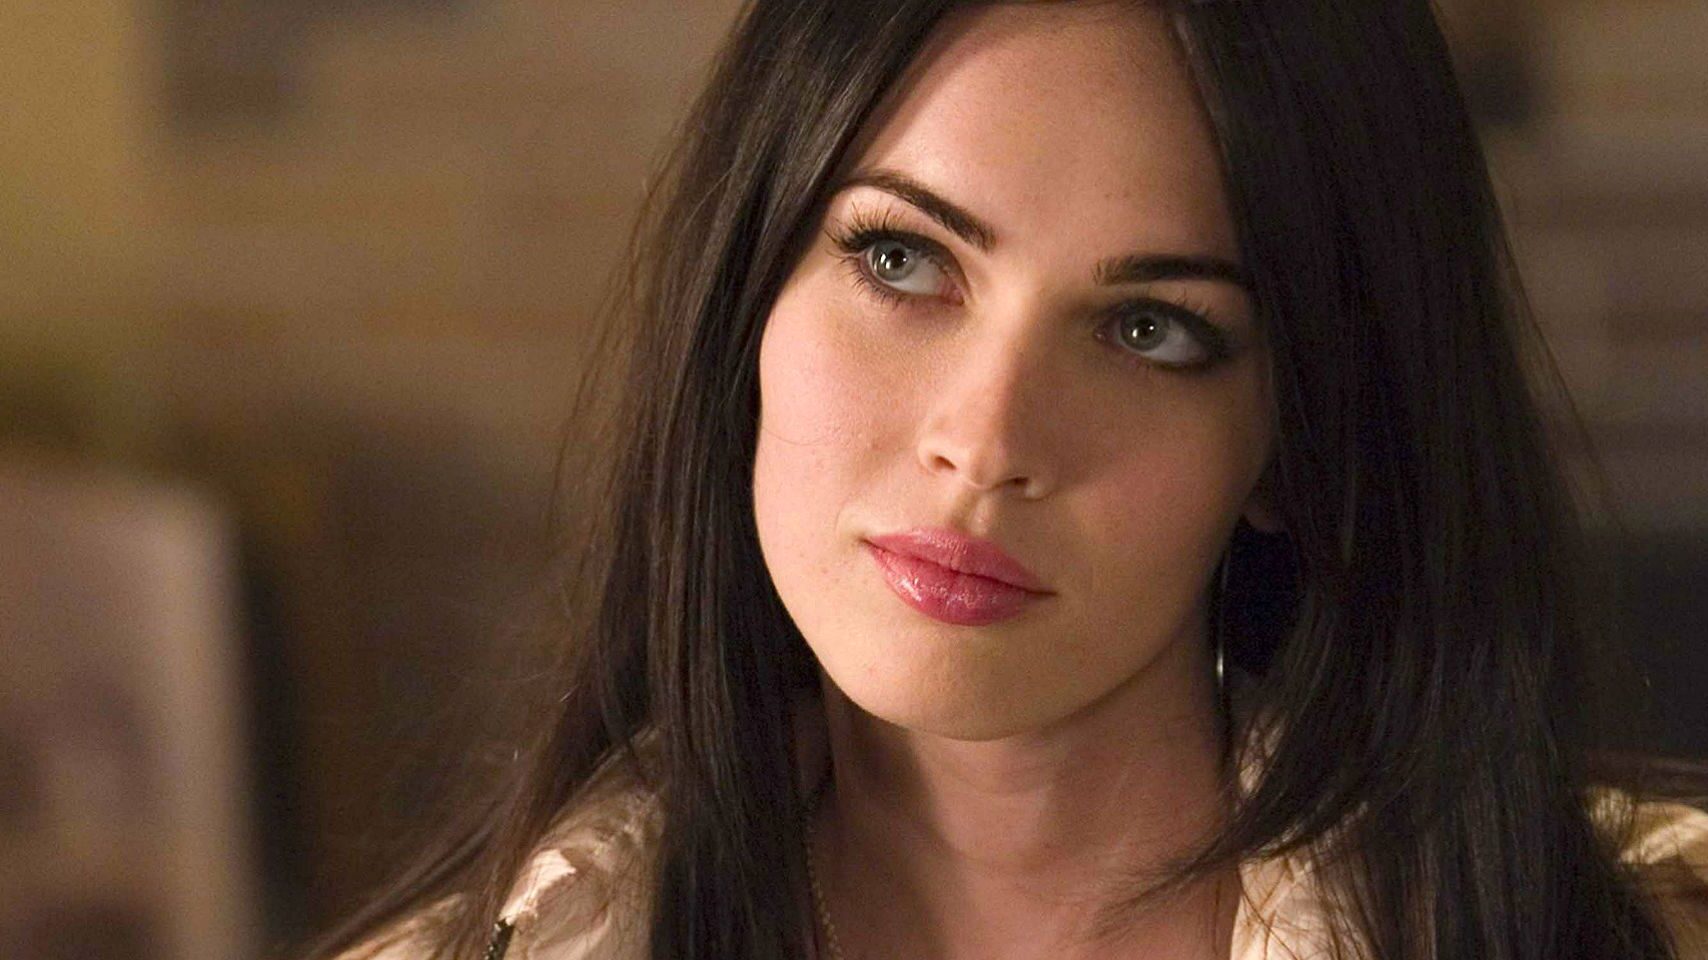 Megan Fox lashes out at US govt, Supreme Court after Chicago shooting